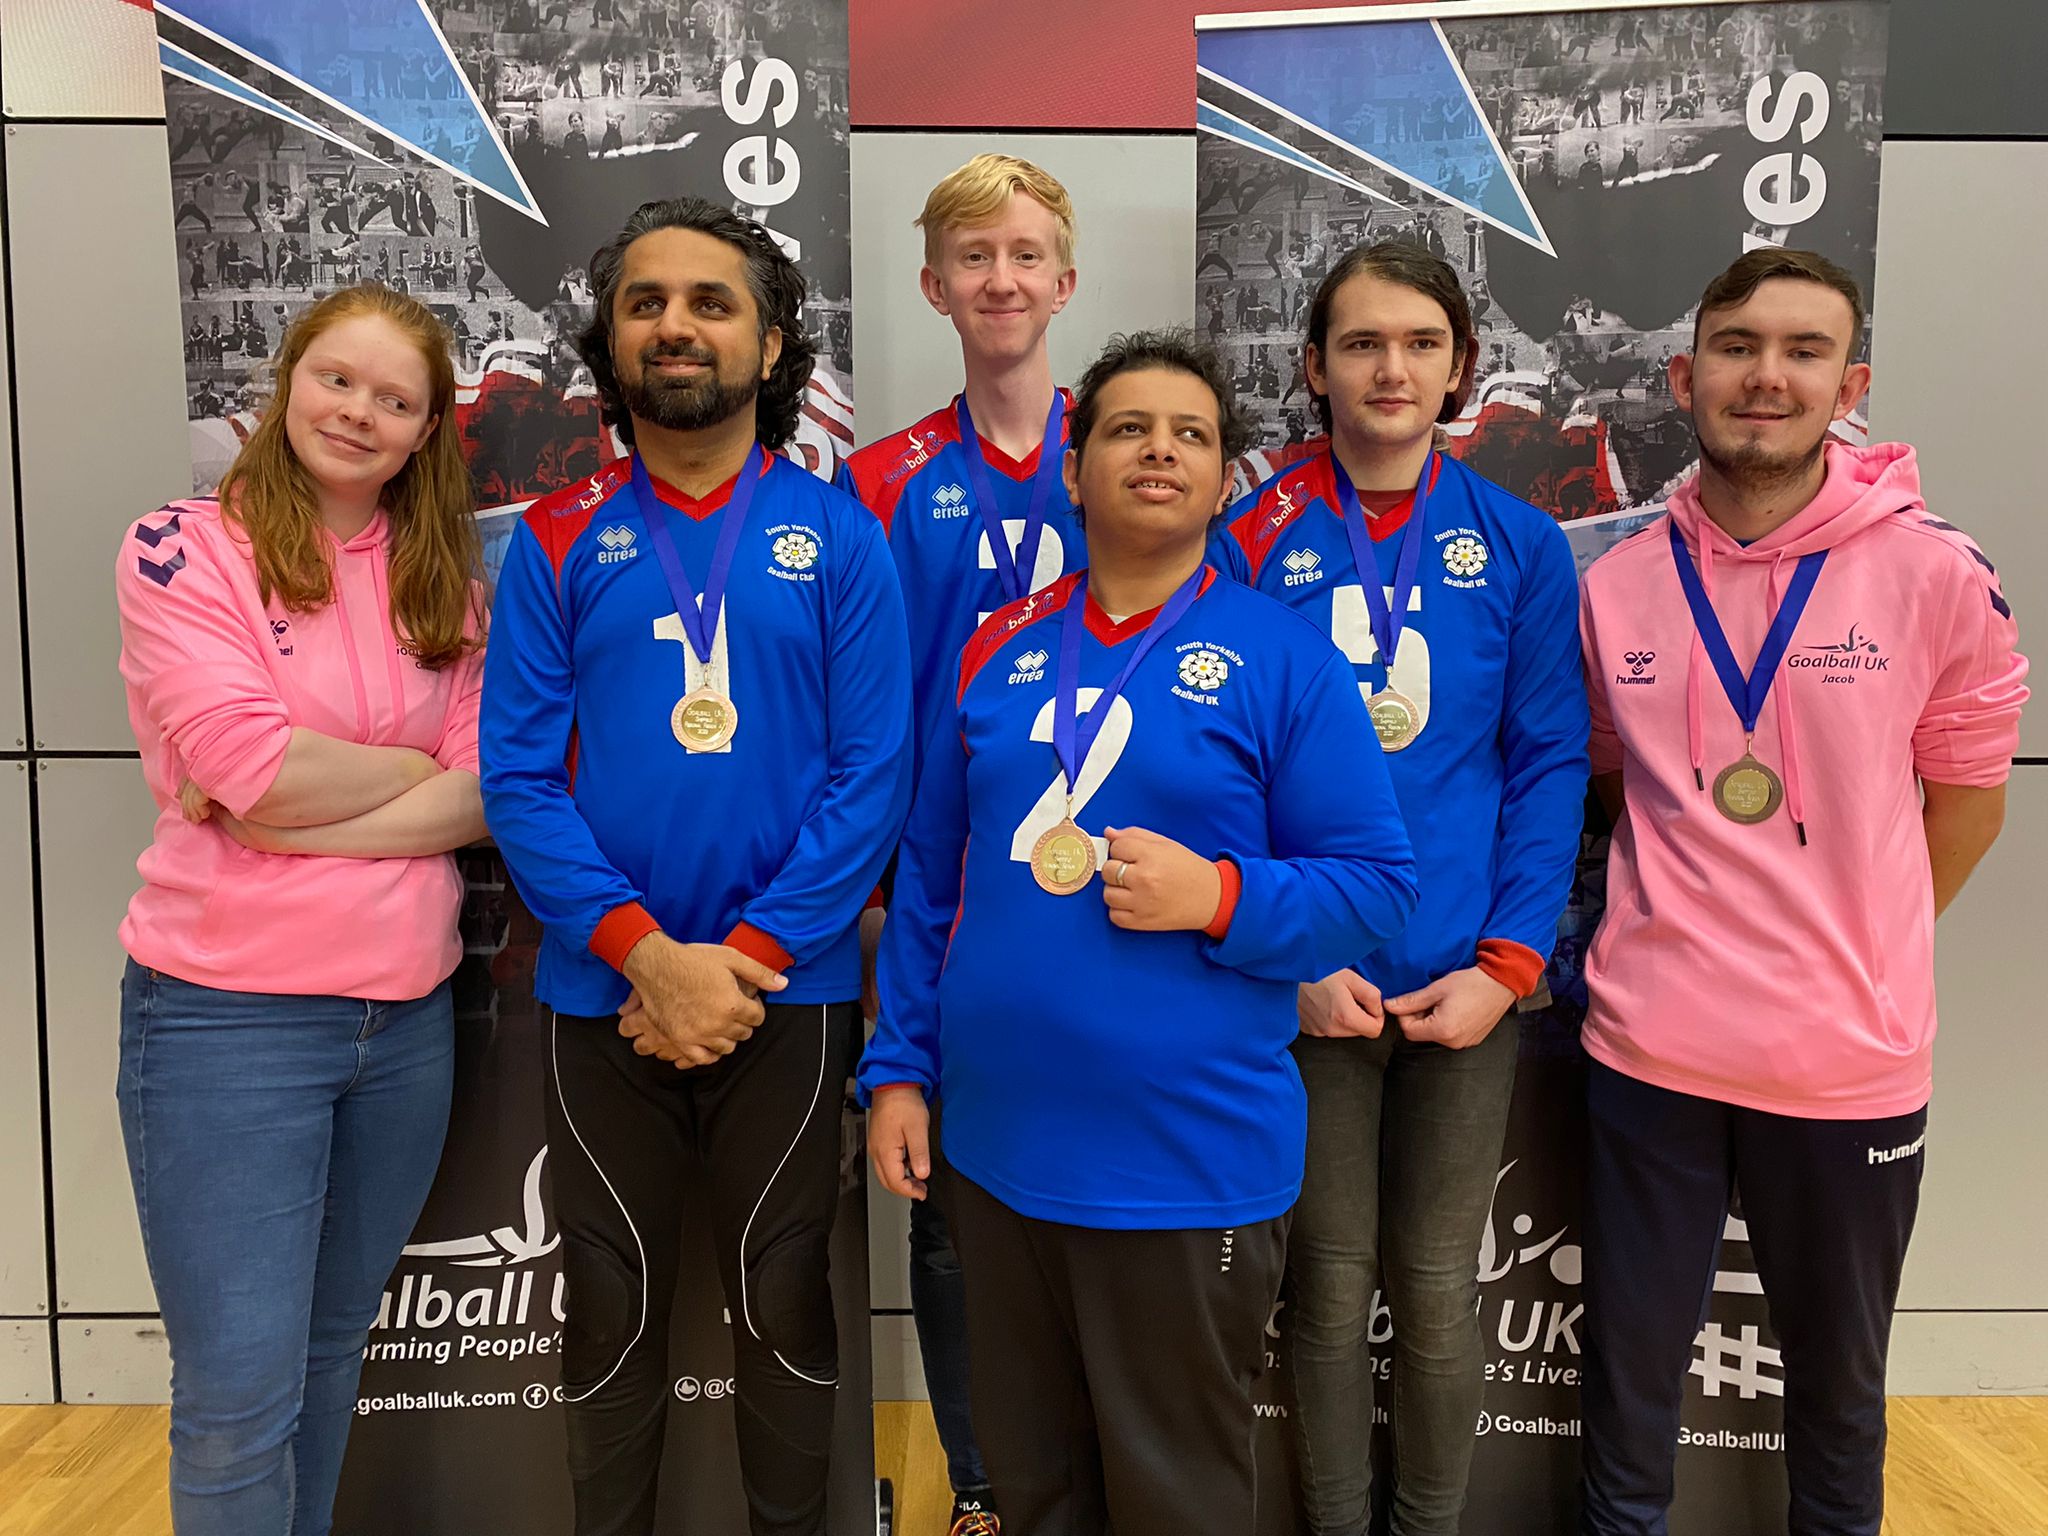 West Yorkshire goalball club posing with their medals